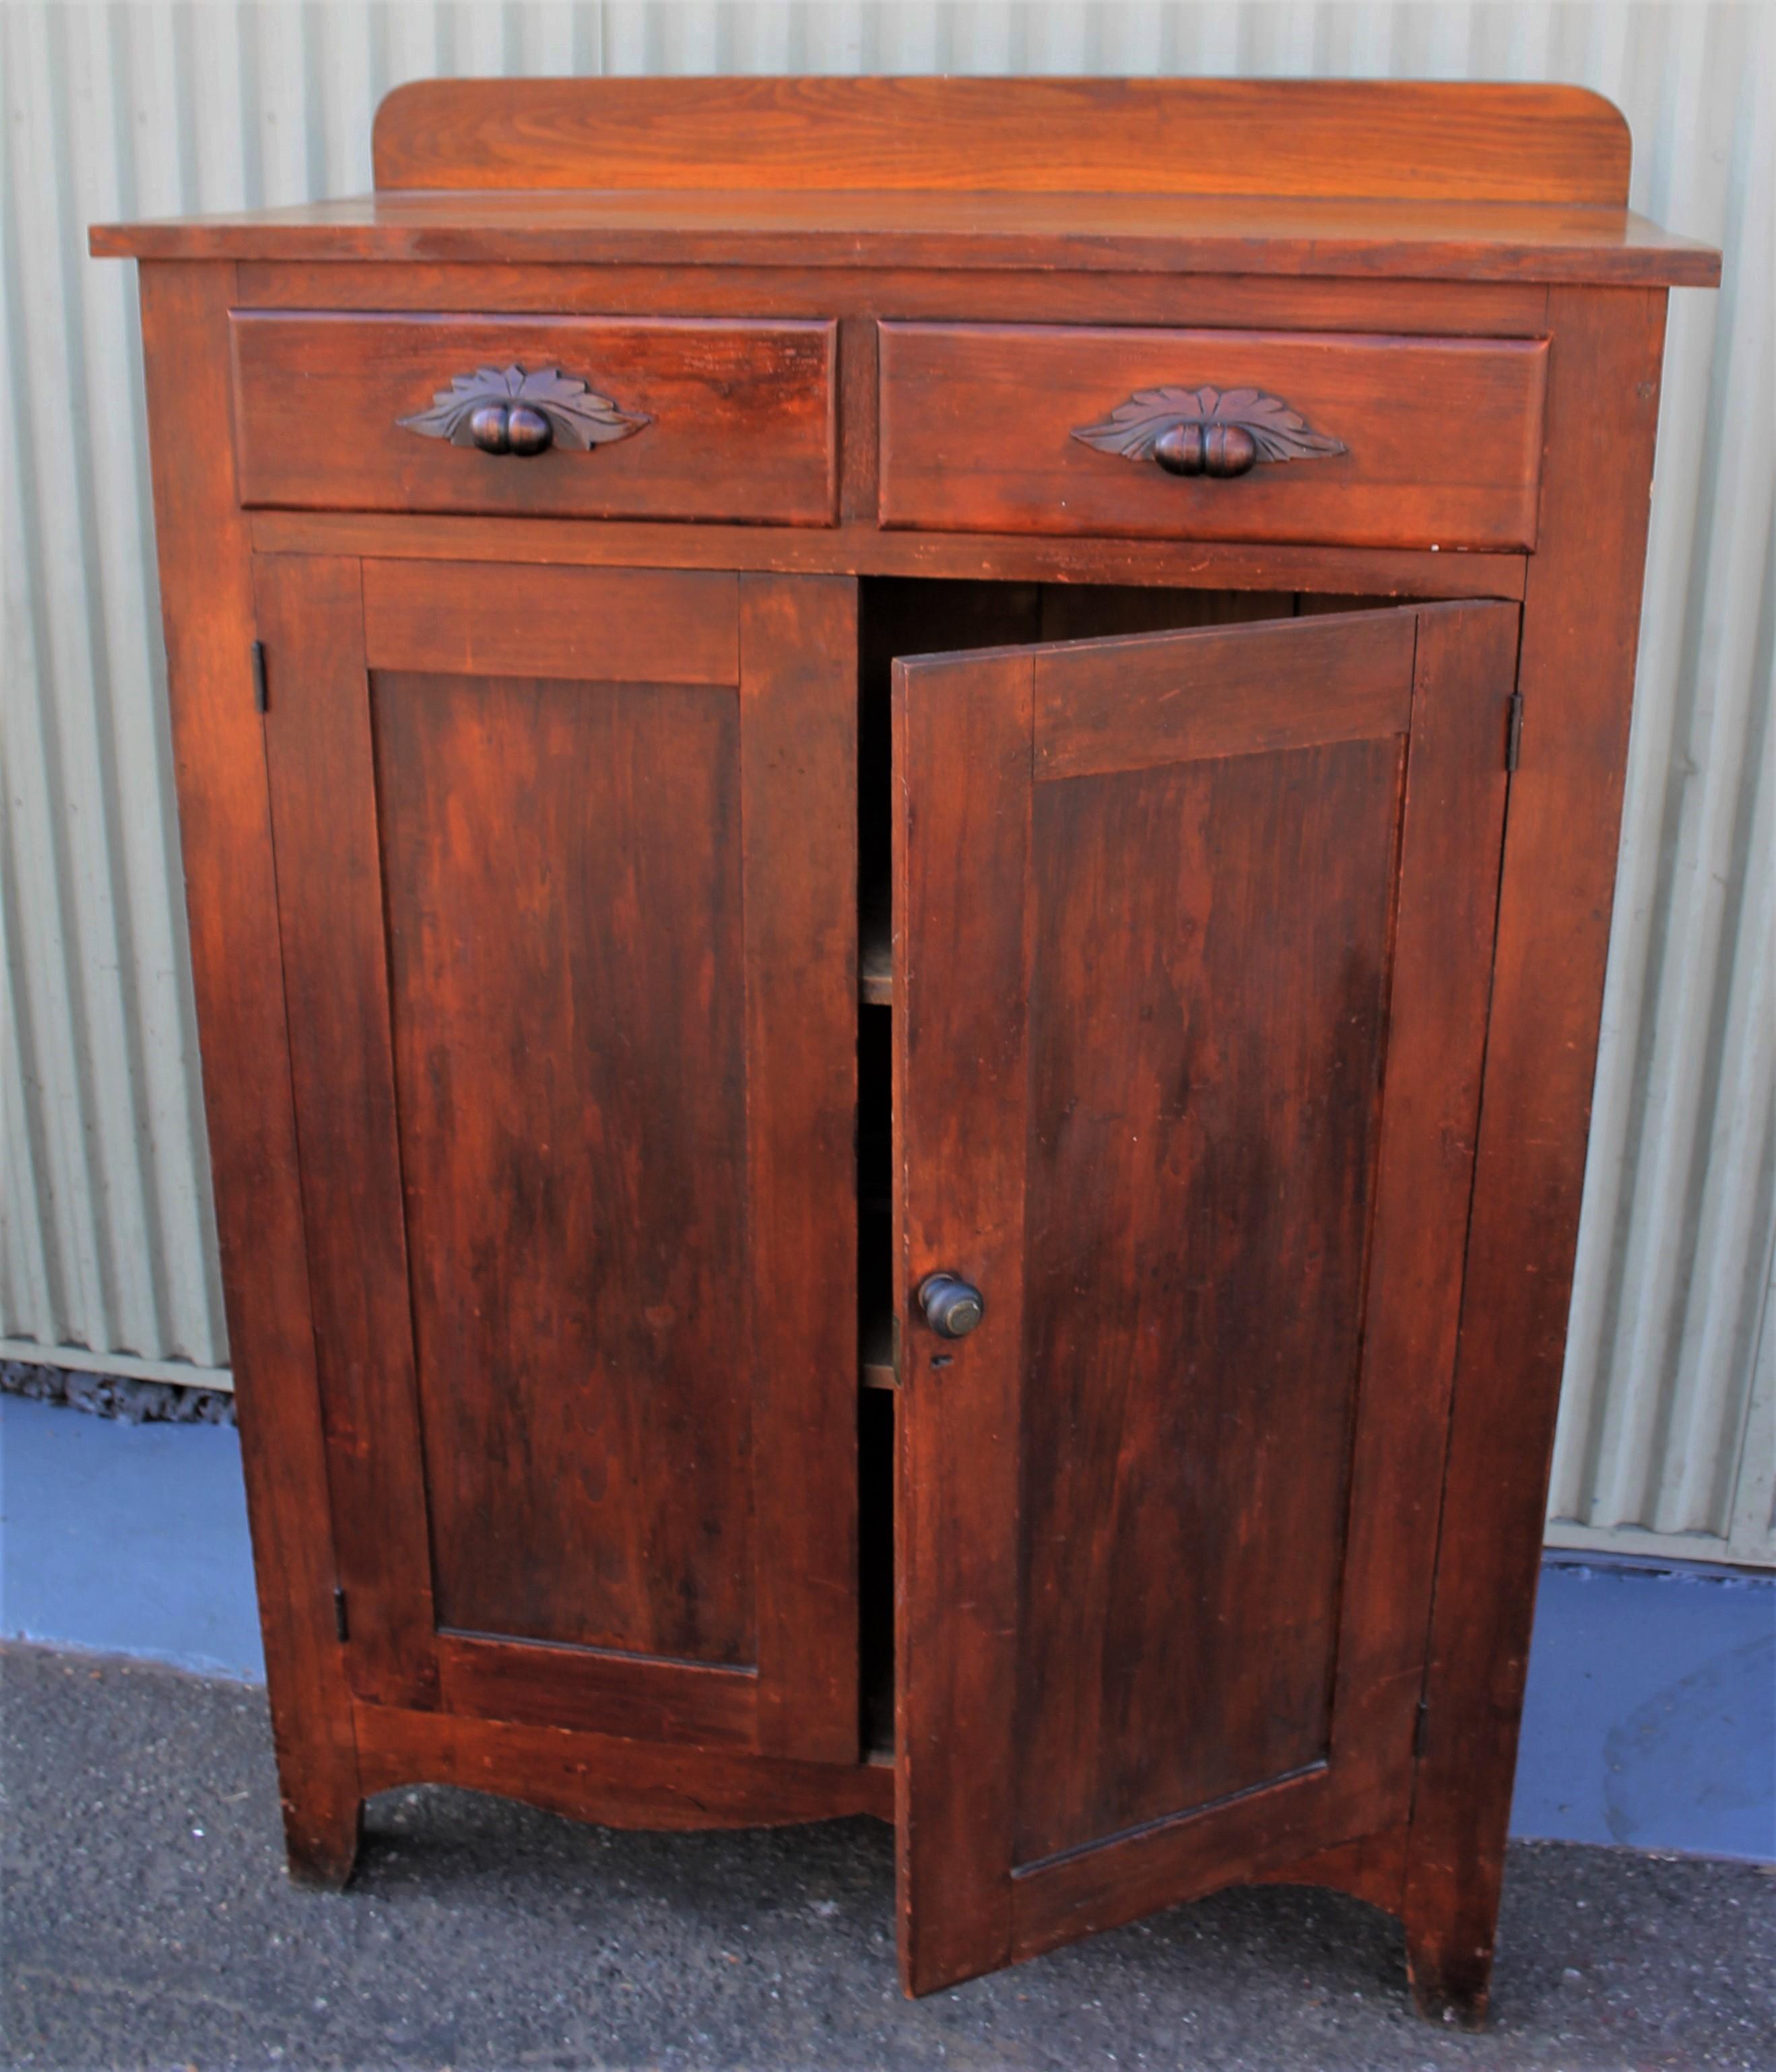 19th century pie safe in original stained surface. This beautiful pie safe has been checked for strength and stability. The cupboard is in fine condition and the original tins are good as well. Everything is all original.